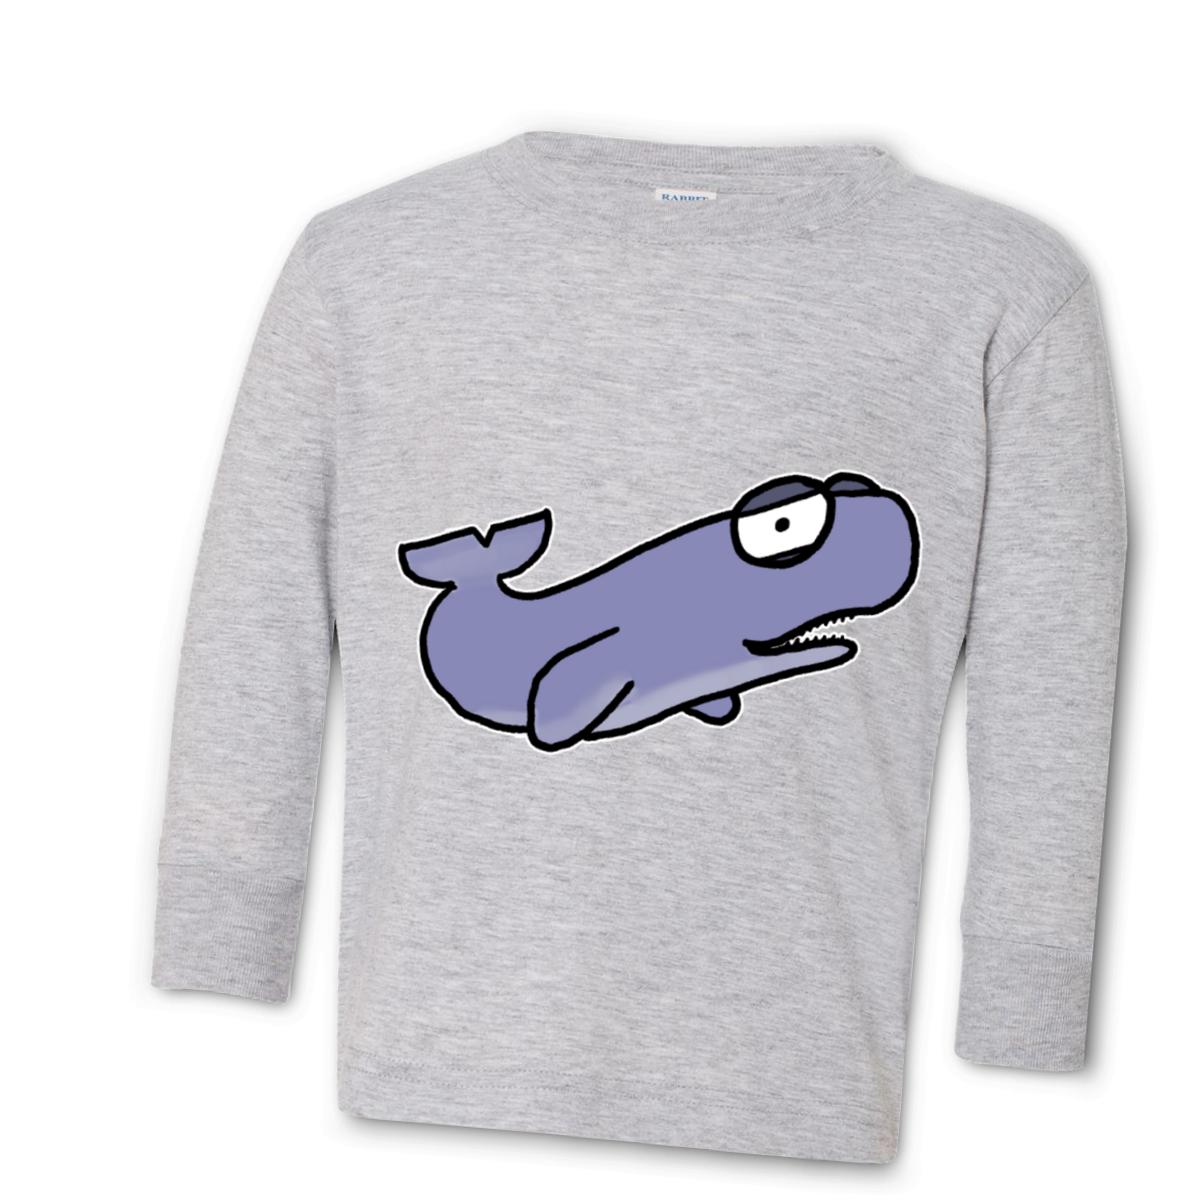 Sperm Whale Toddler Long Sleeve Tee 4T heather